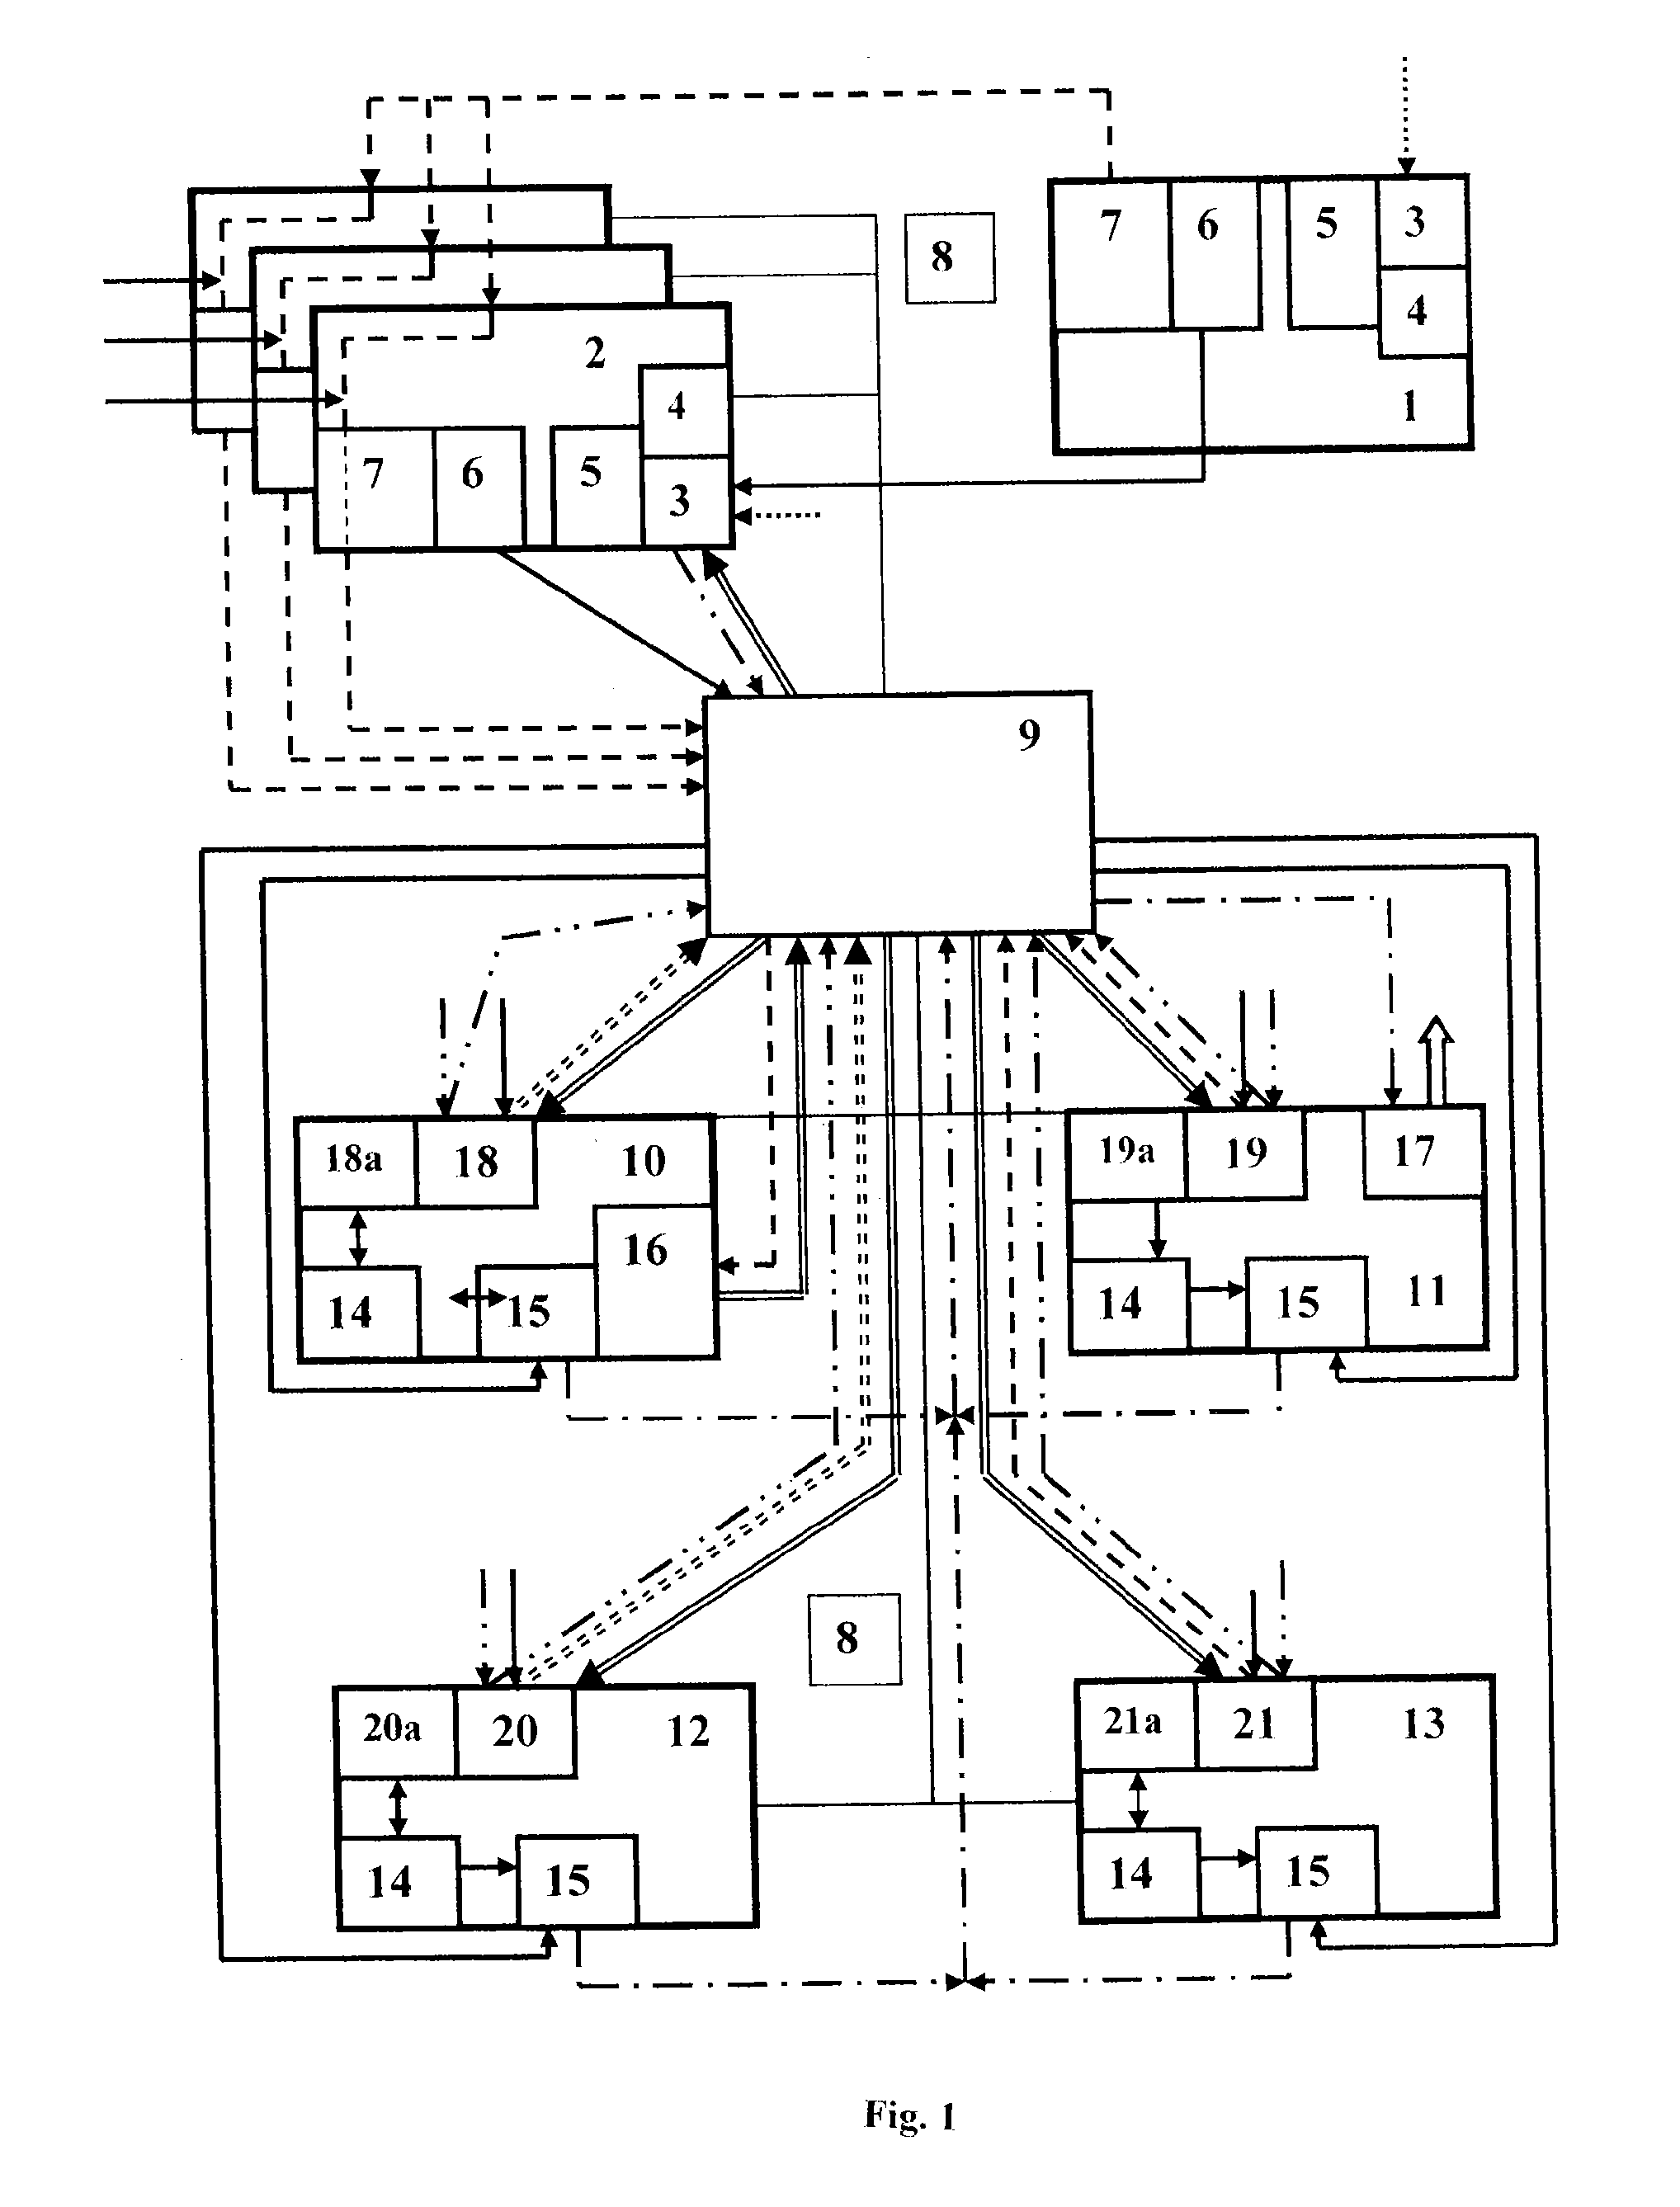 Method and system for preparation and implementation of electronic voting